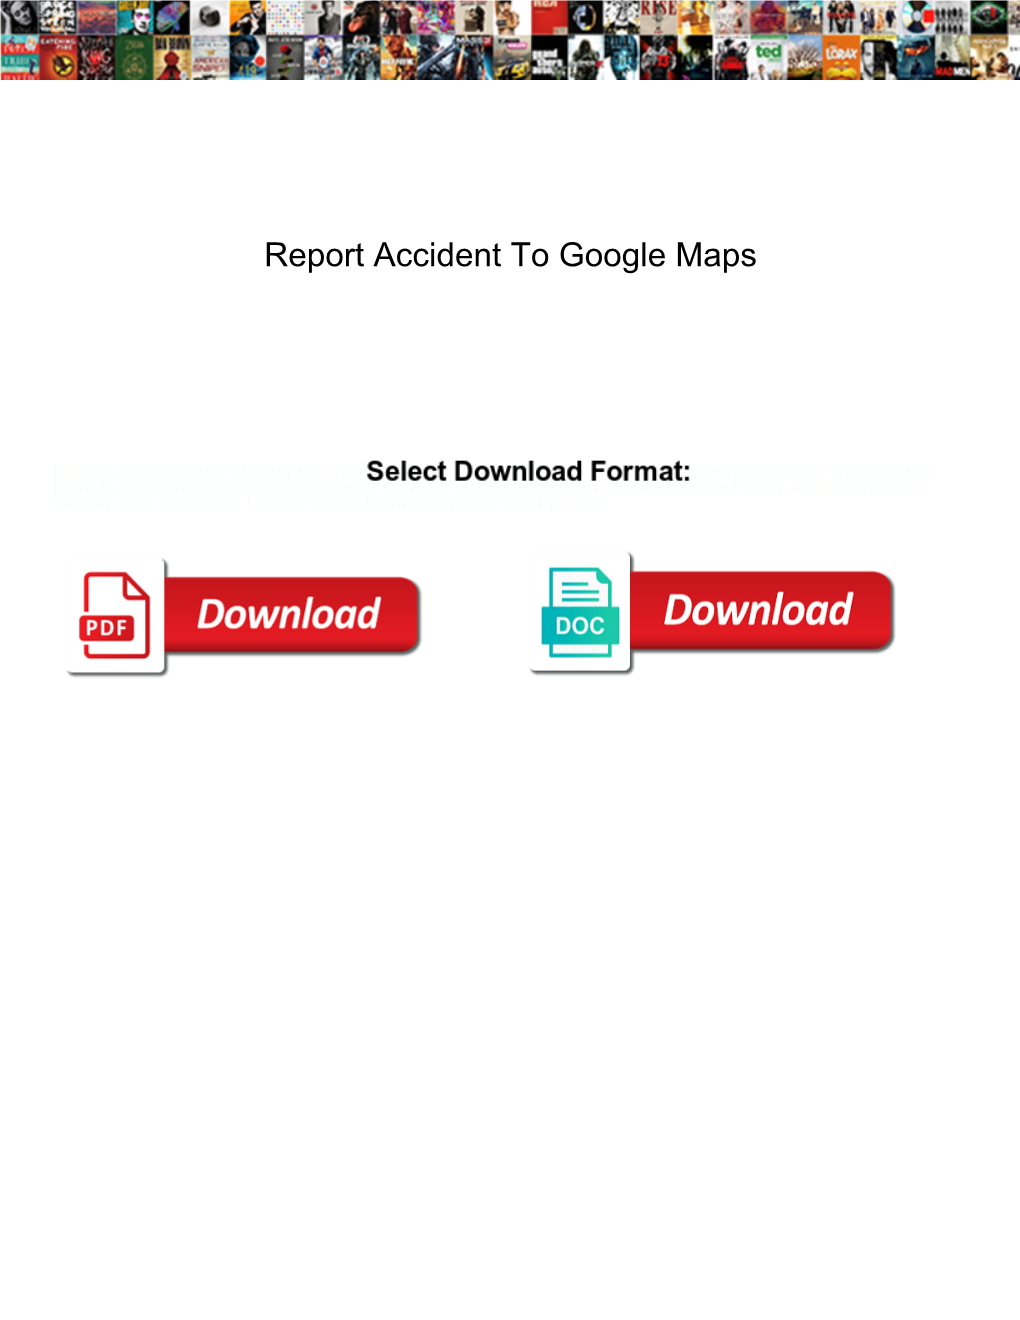 Report Accident to Google Maps